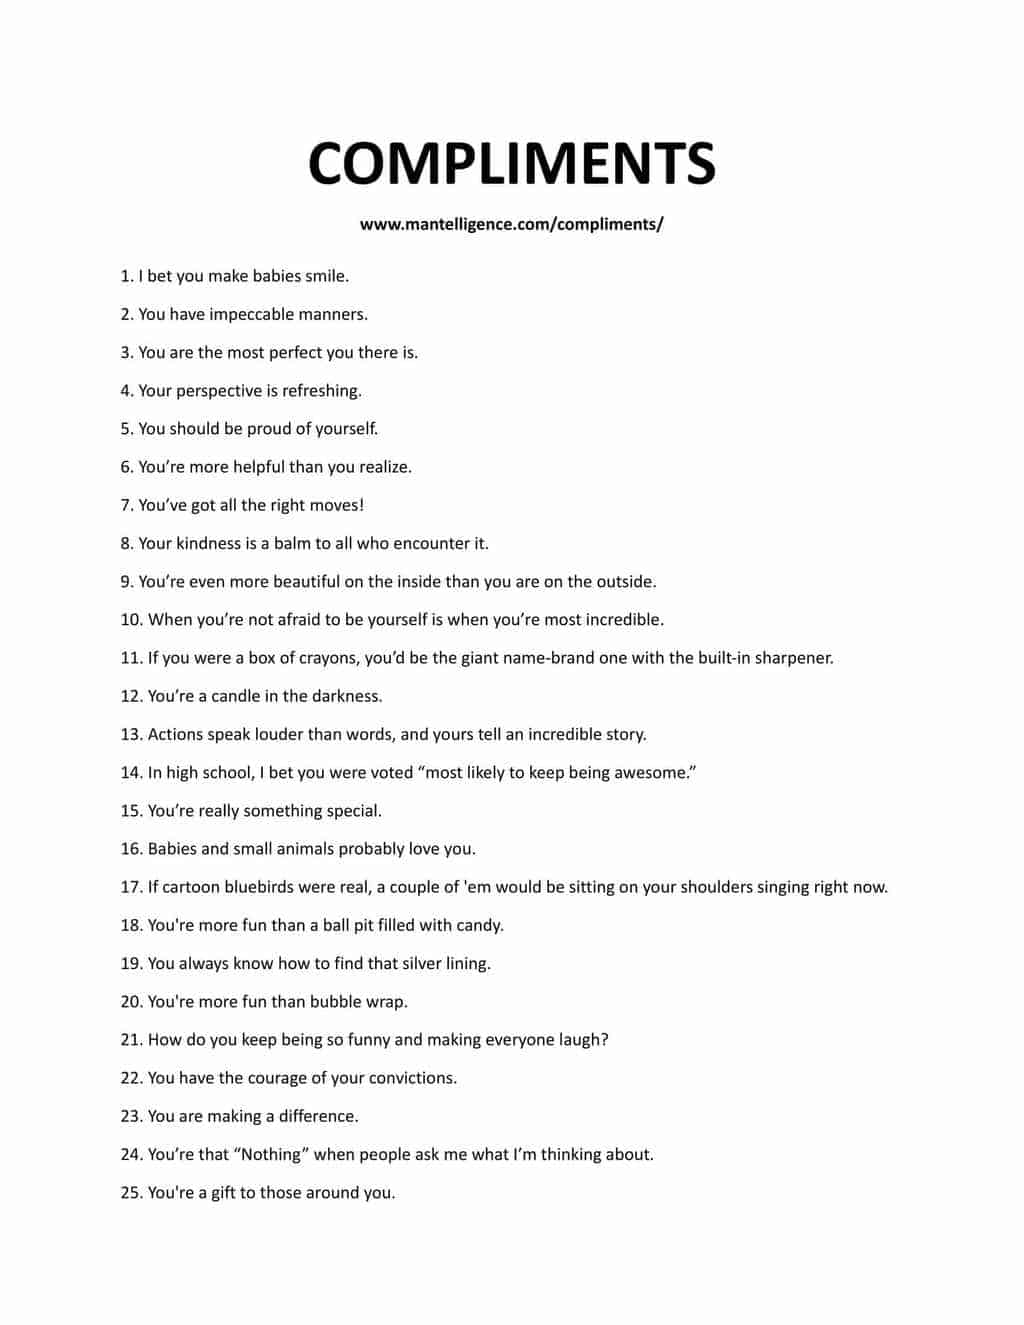 101+ Best Compliments for Girls to Make Them Feel Admired